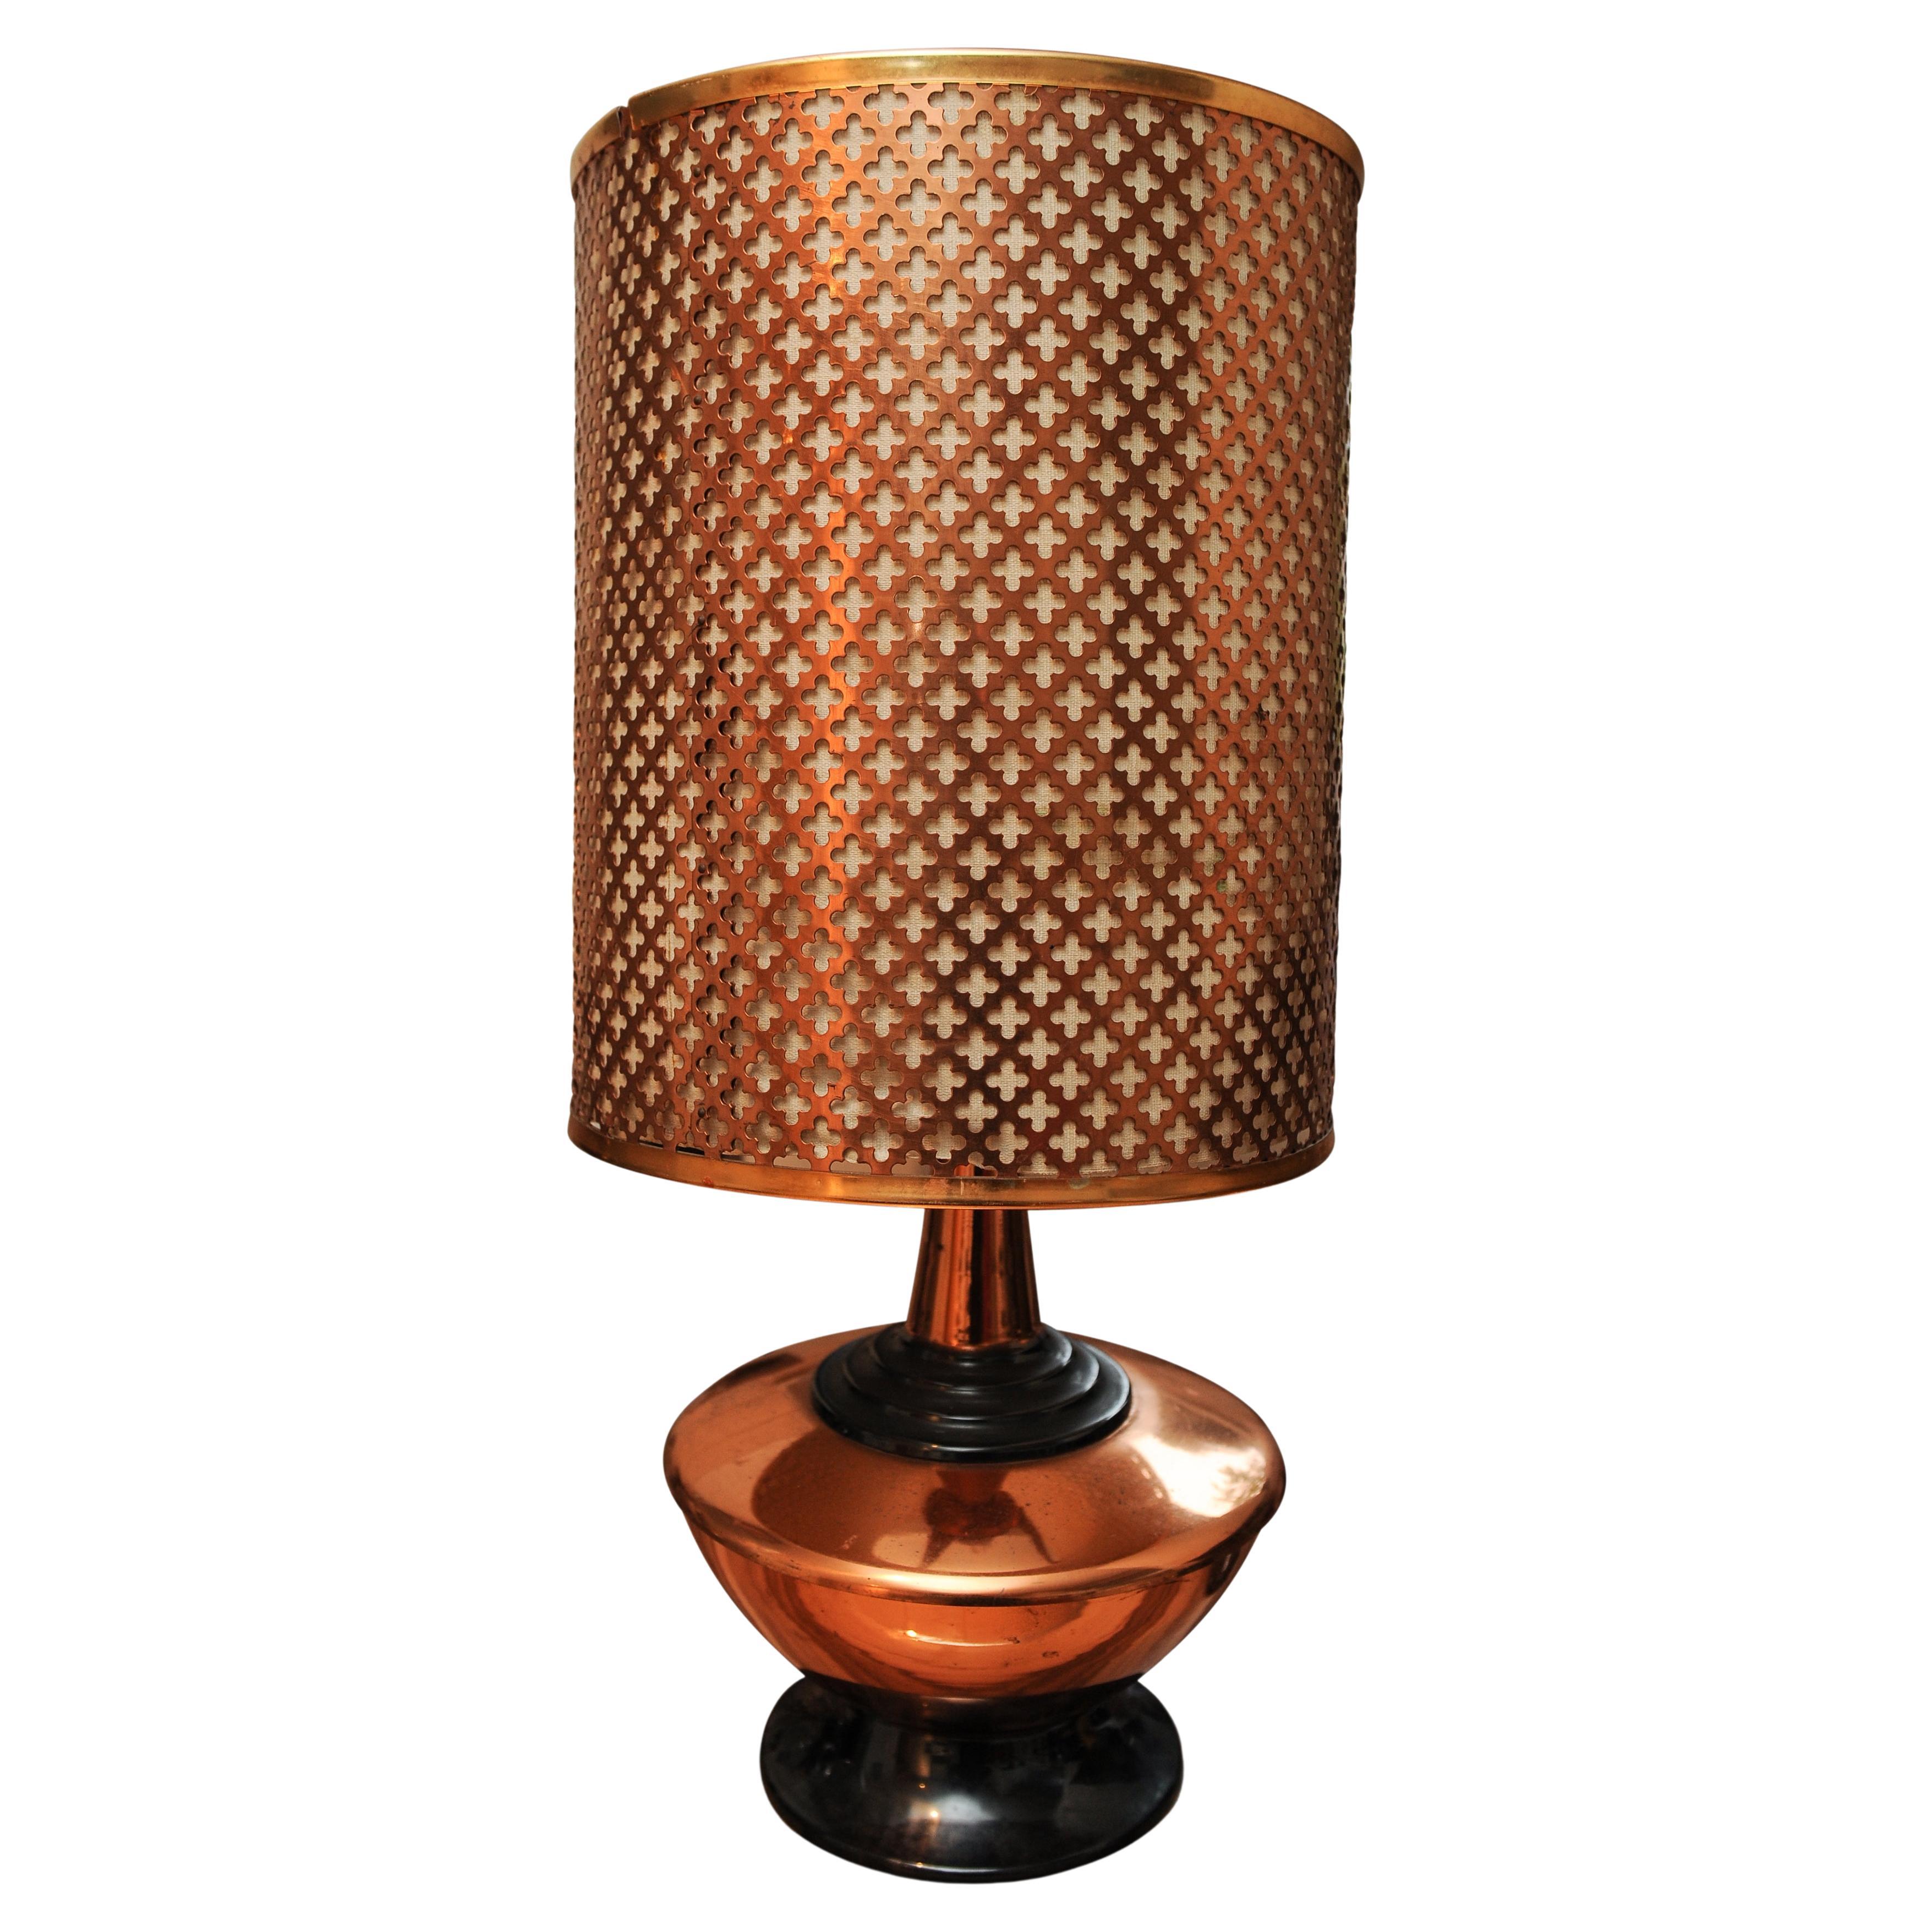 A Zambian Copper Table Lamp With A Repeating Lattice Work Pattern